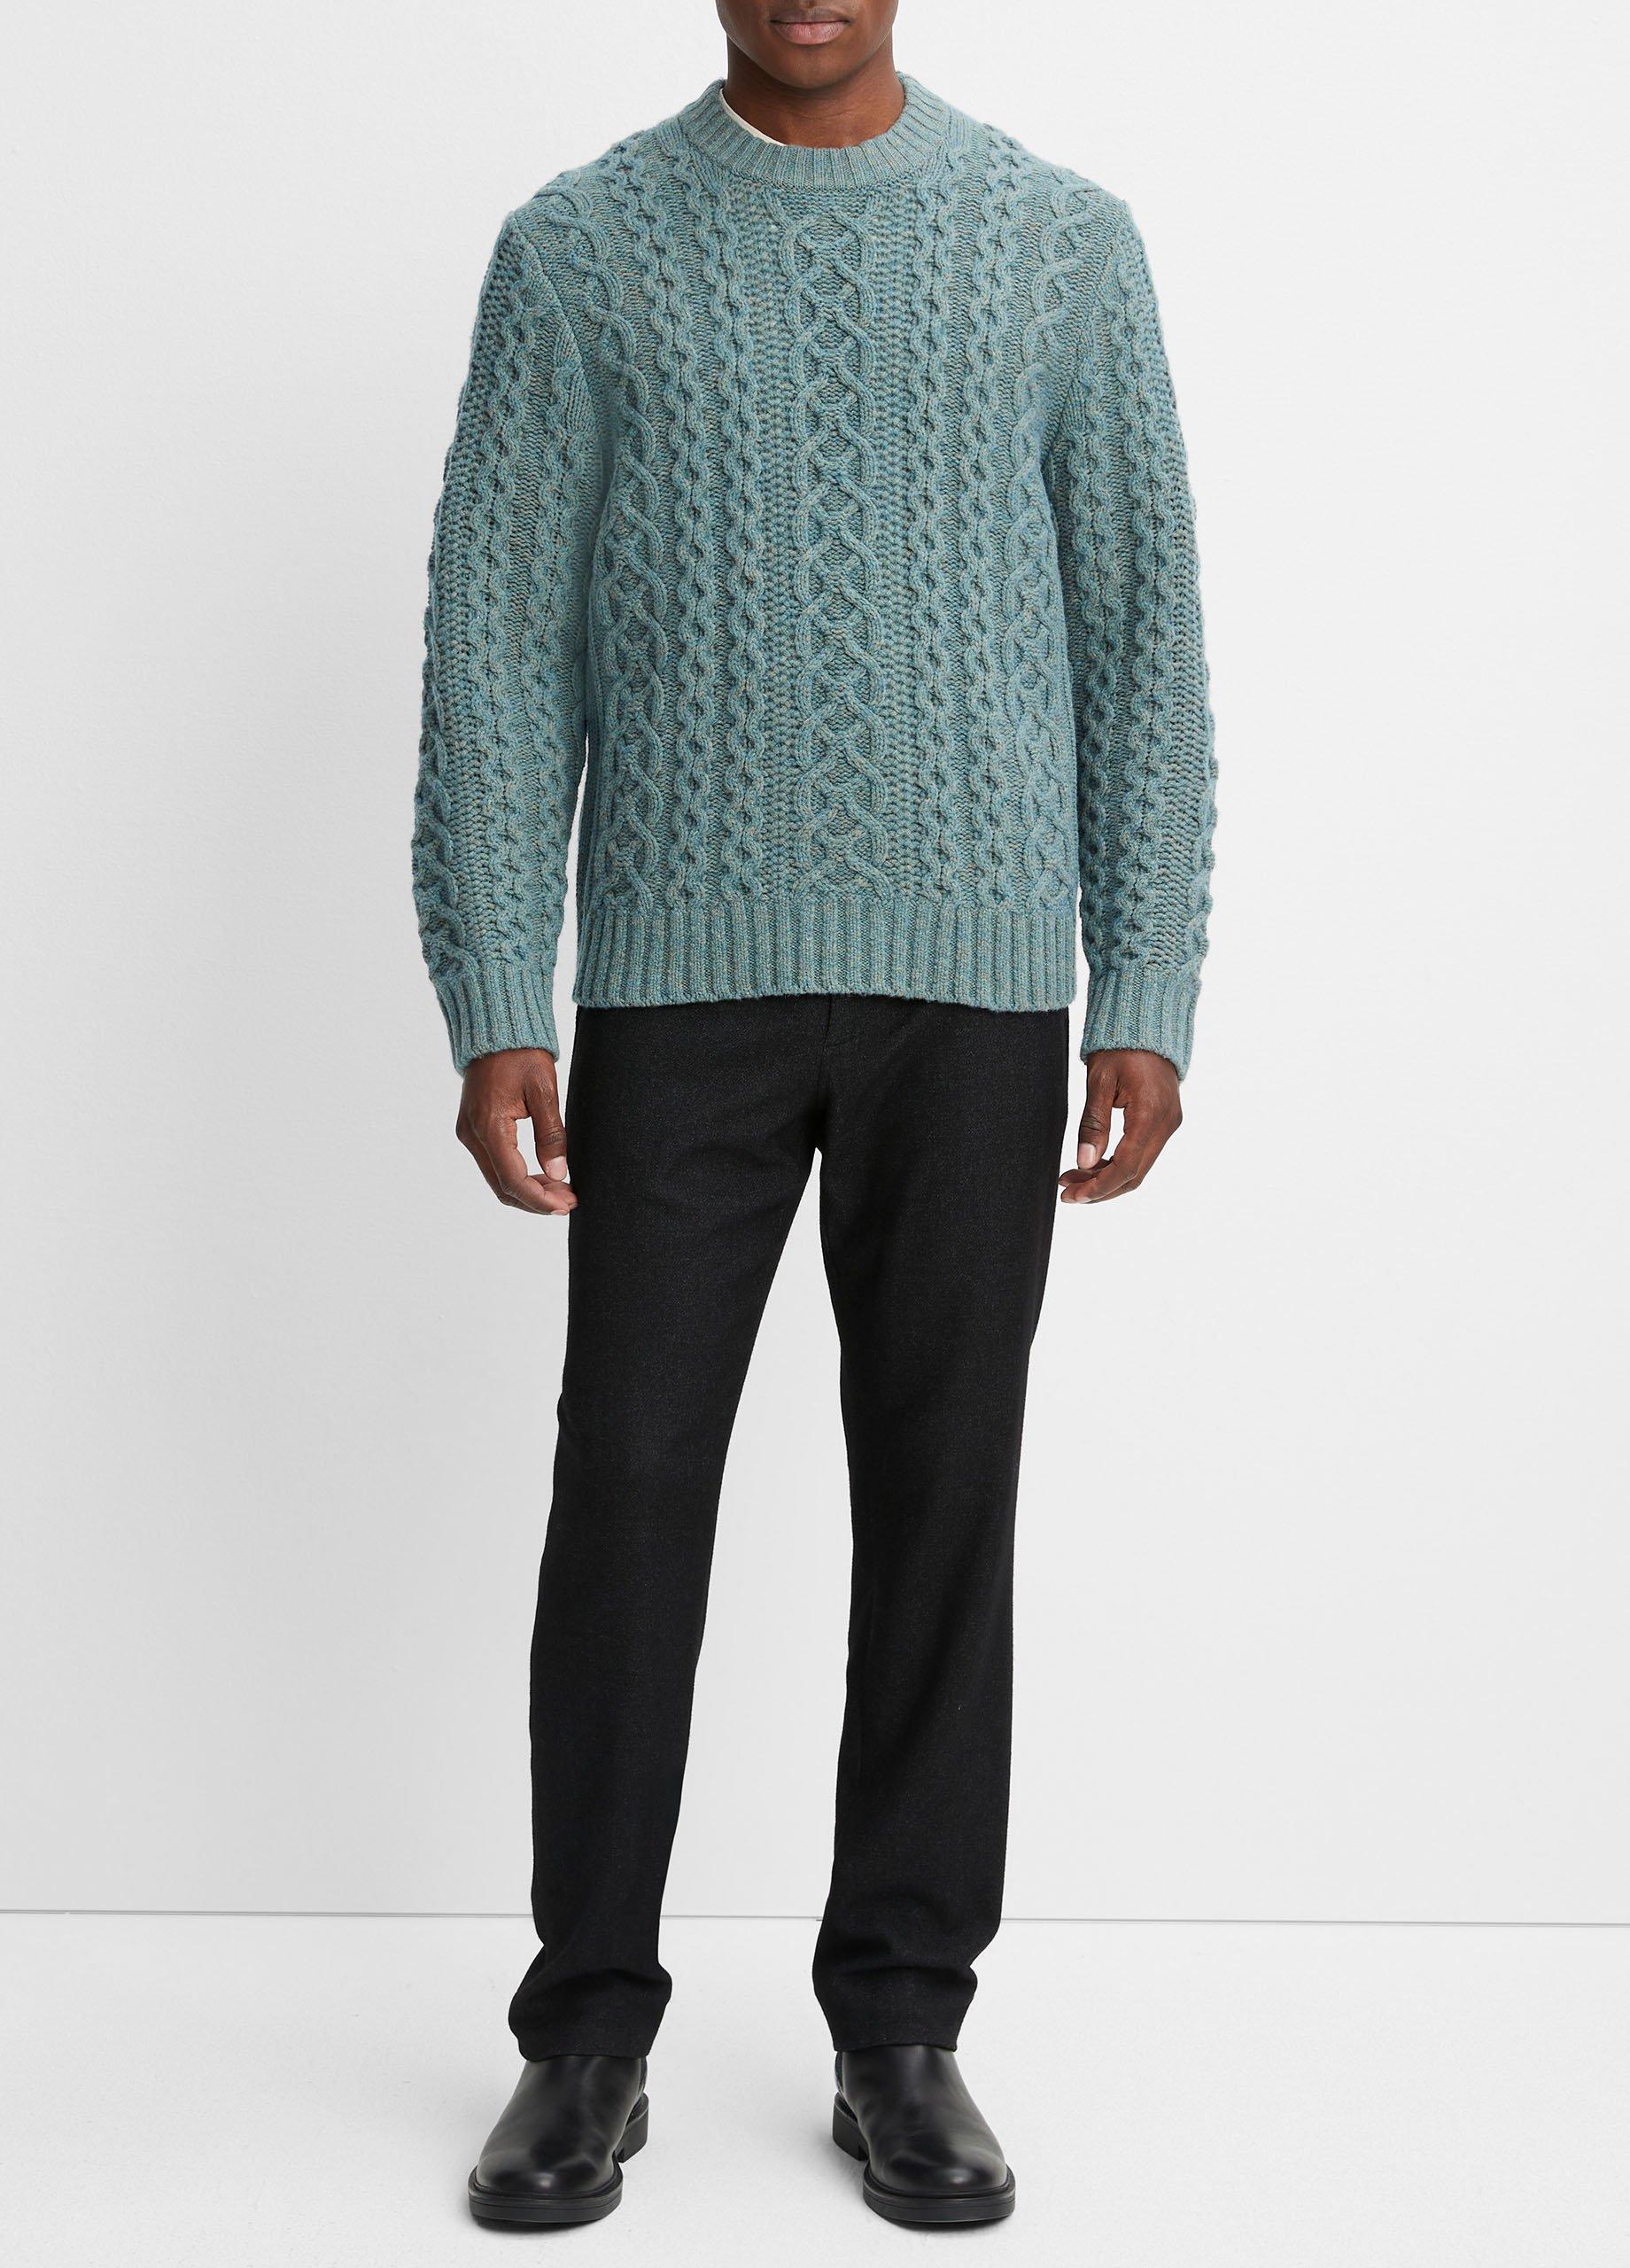 Merino Wool-Cashmere Aran Cable Crew Neck Sweater in Crew Neck | Vince